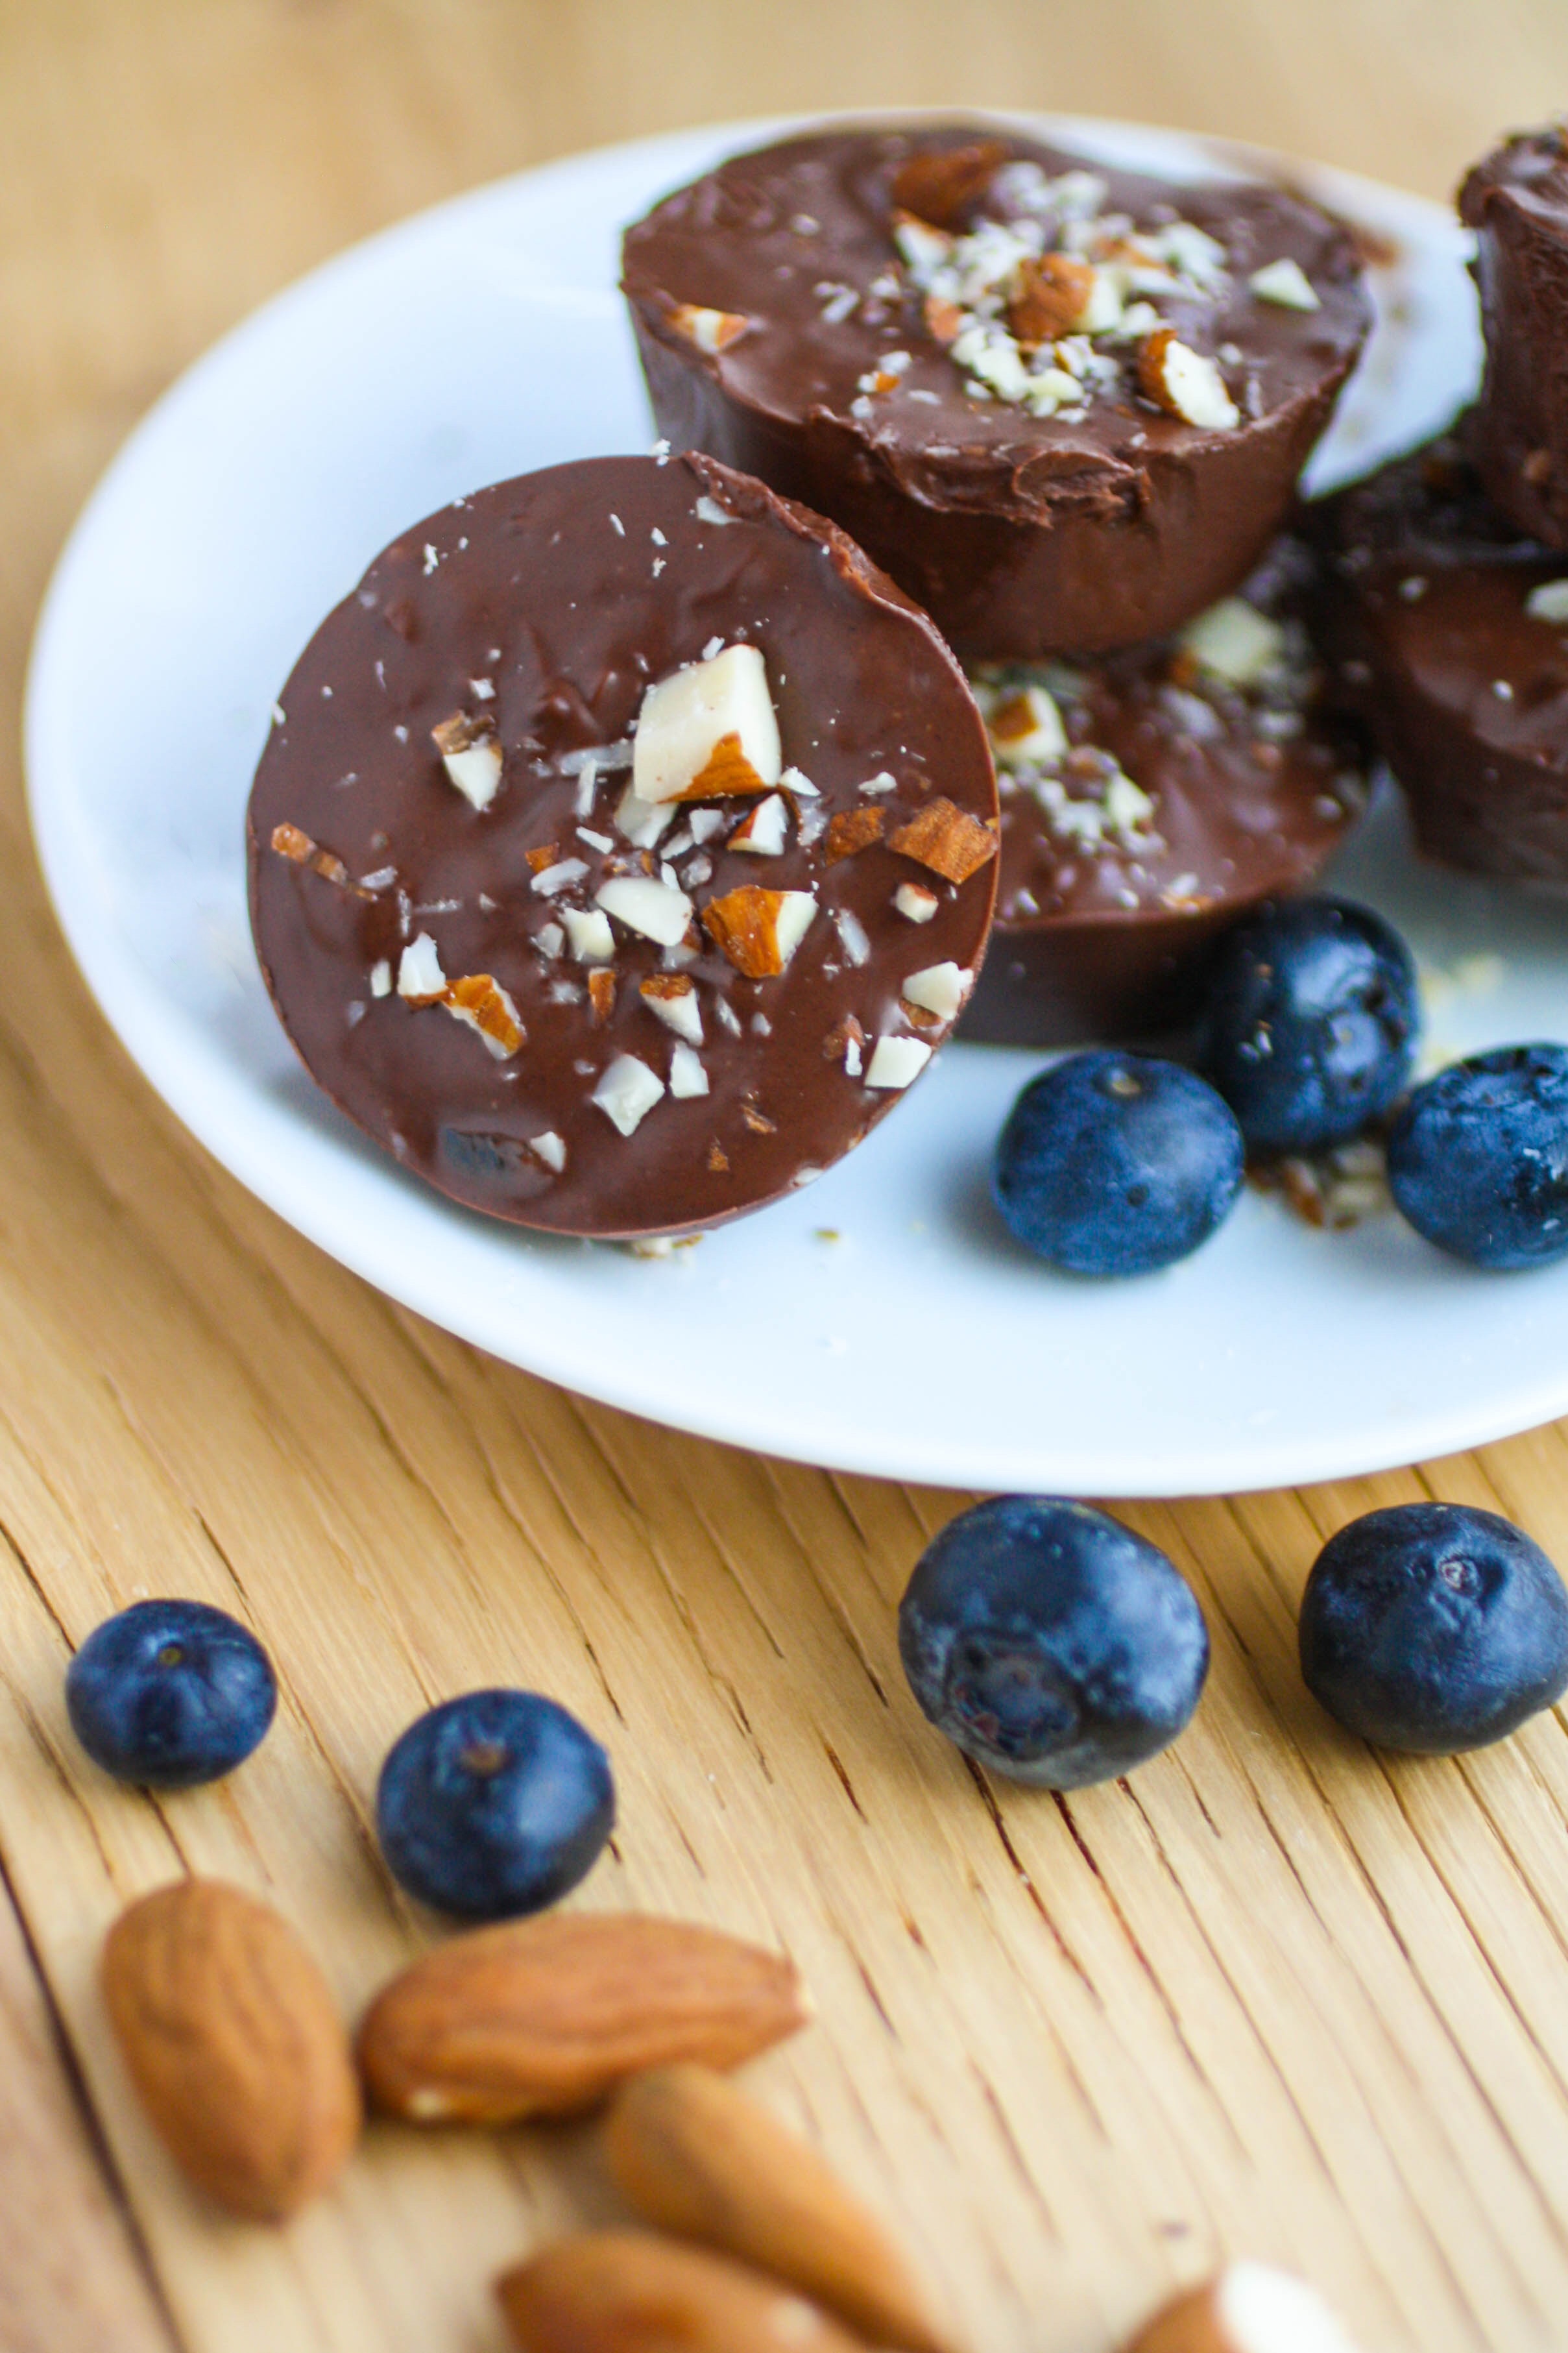 Chocolate Almond Blueberry Bites will satisfy your sweet tooth. These candies are really easy to make!